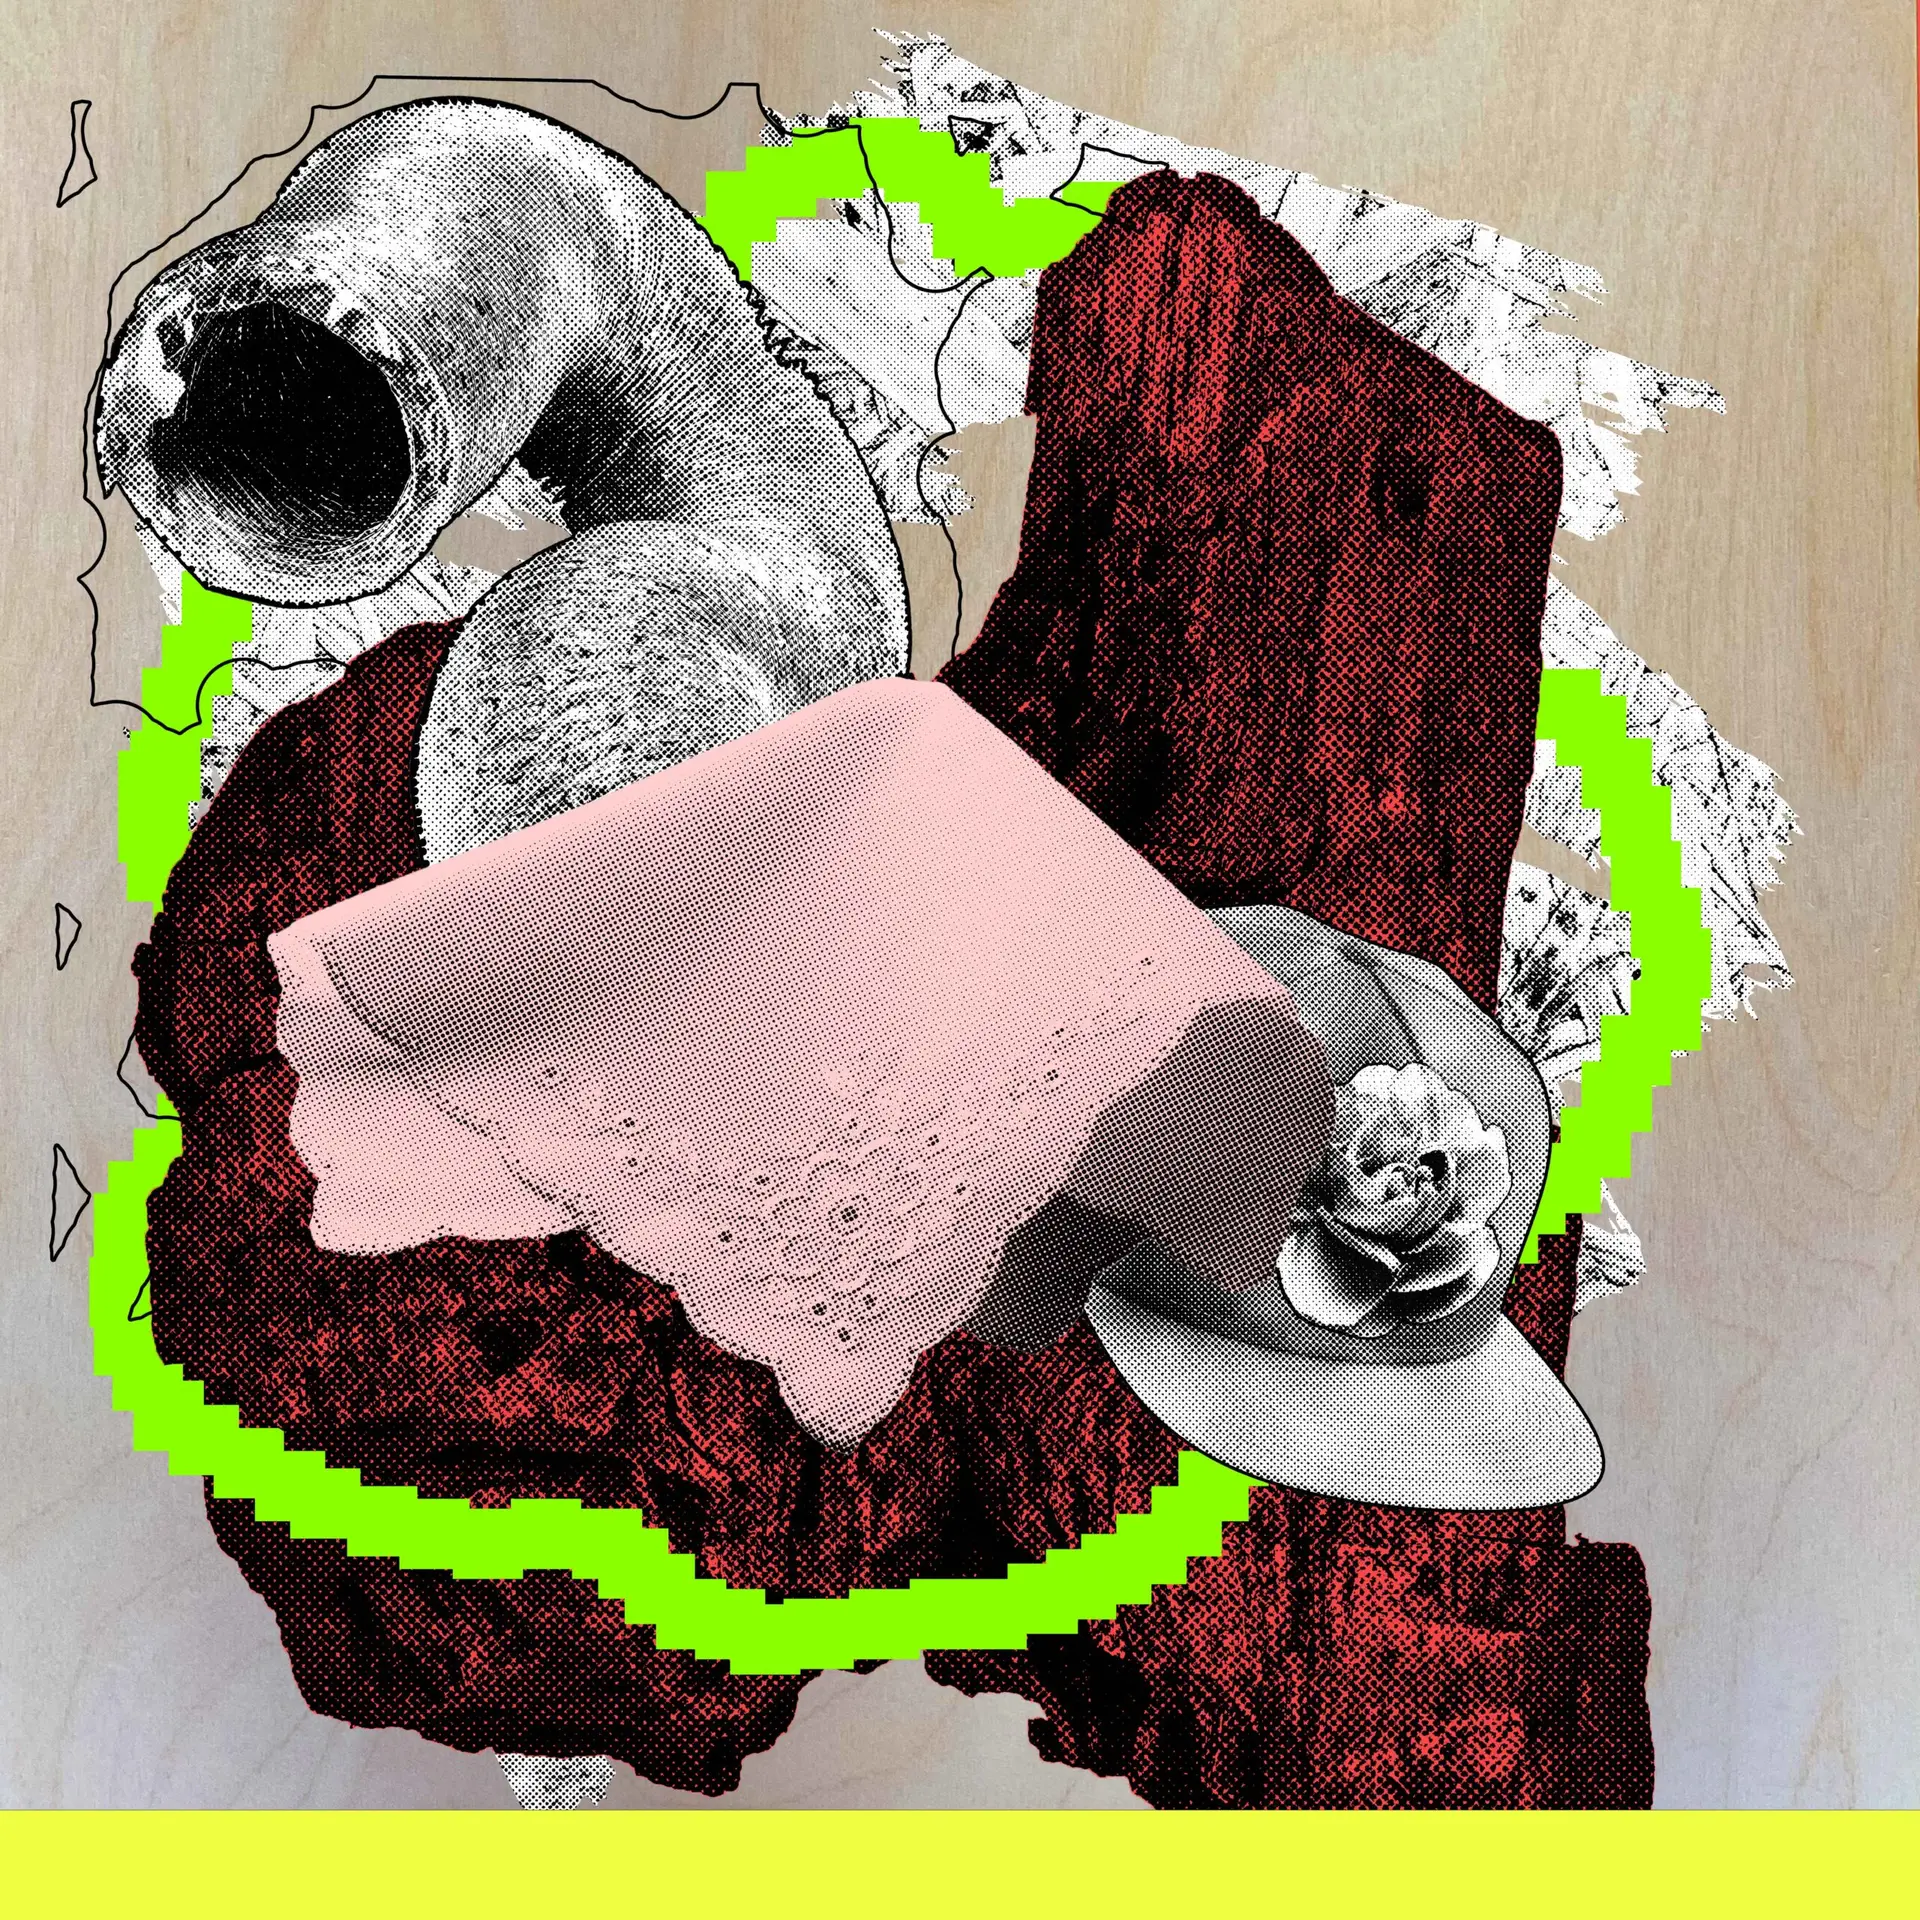 On a gradient brown to grey background from top to bottom, a collage of drawn and photographed images are positioned above it. There is a pink hankerchief in the foreground, a grey baseball cap below it, a drawn grey tube, and a red wood-textured structure. 